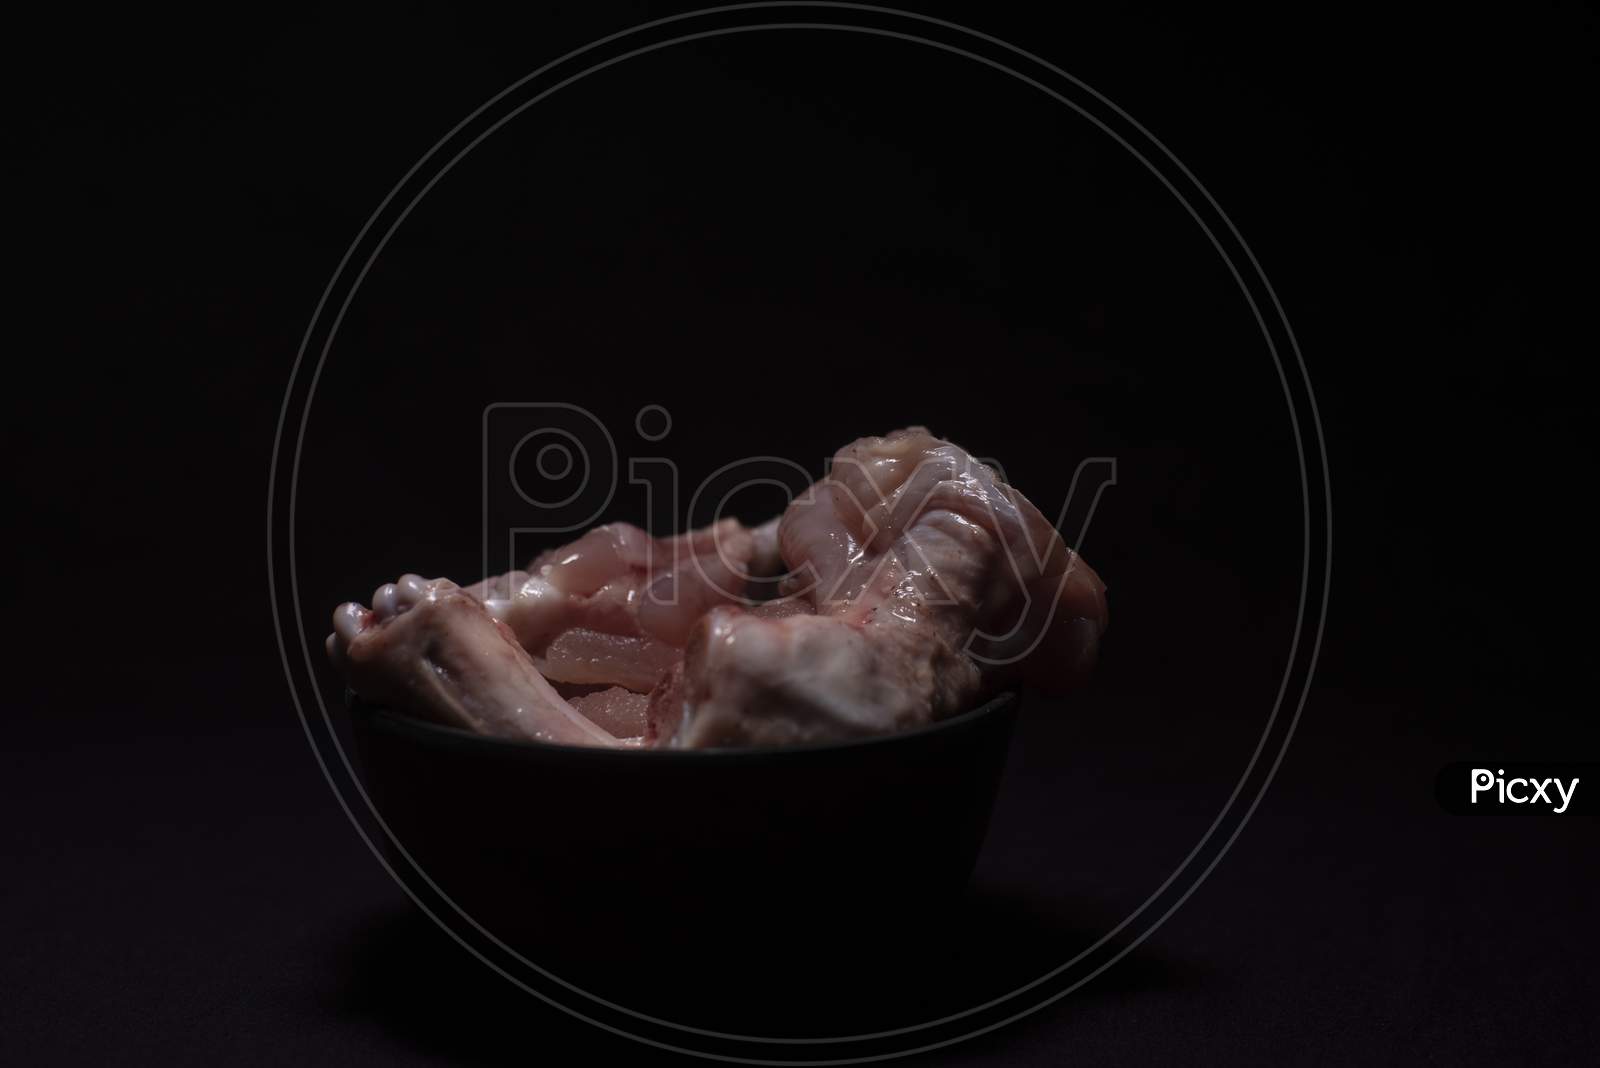 A Bowl Of Raw Chicken Pieces In A Dark Copy Space Background. Food And Product Photography.